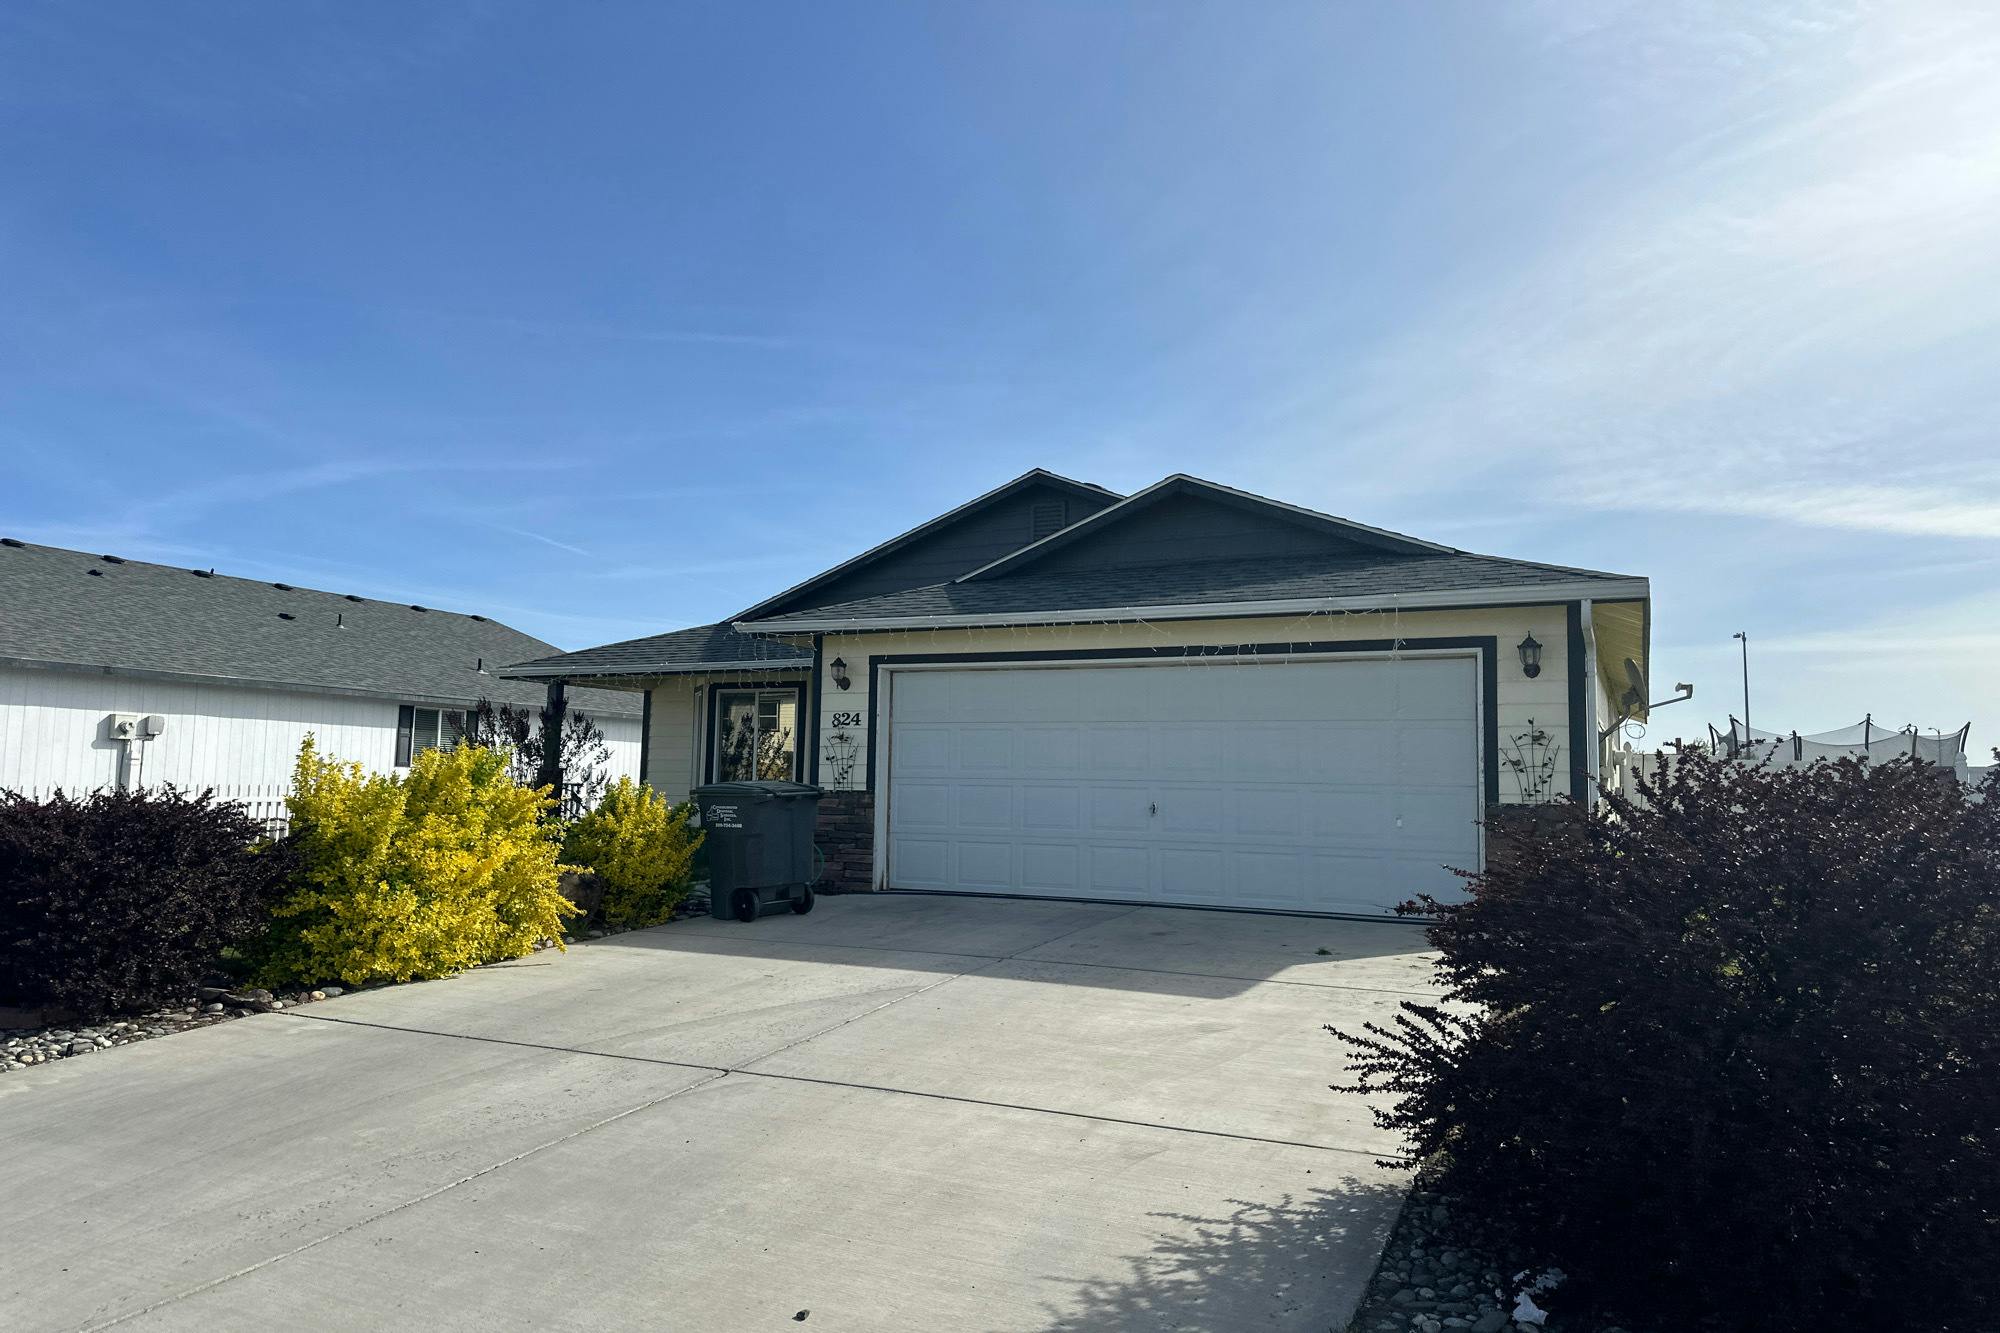 3rd Ave, Quincy, WA 98848 #1